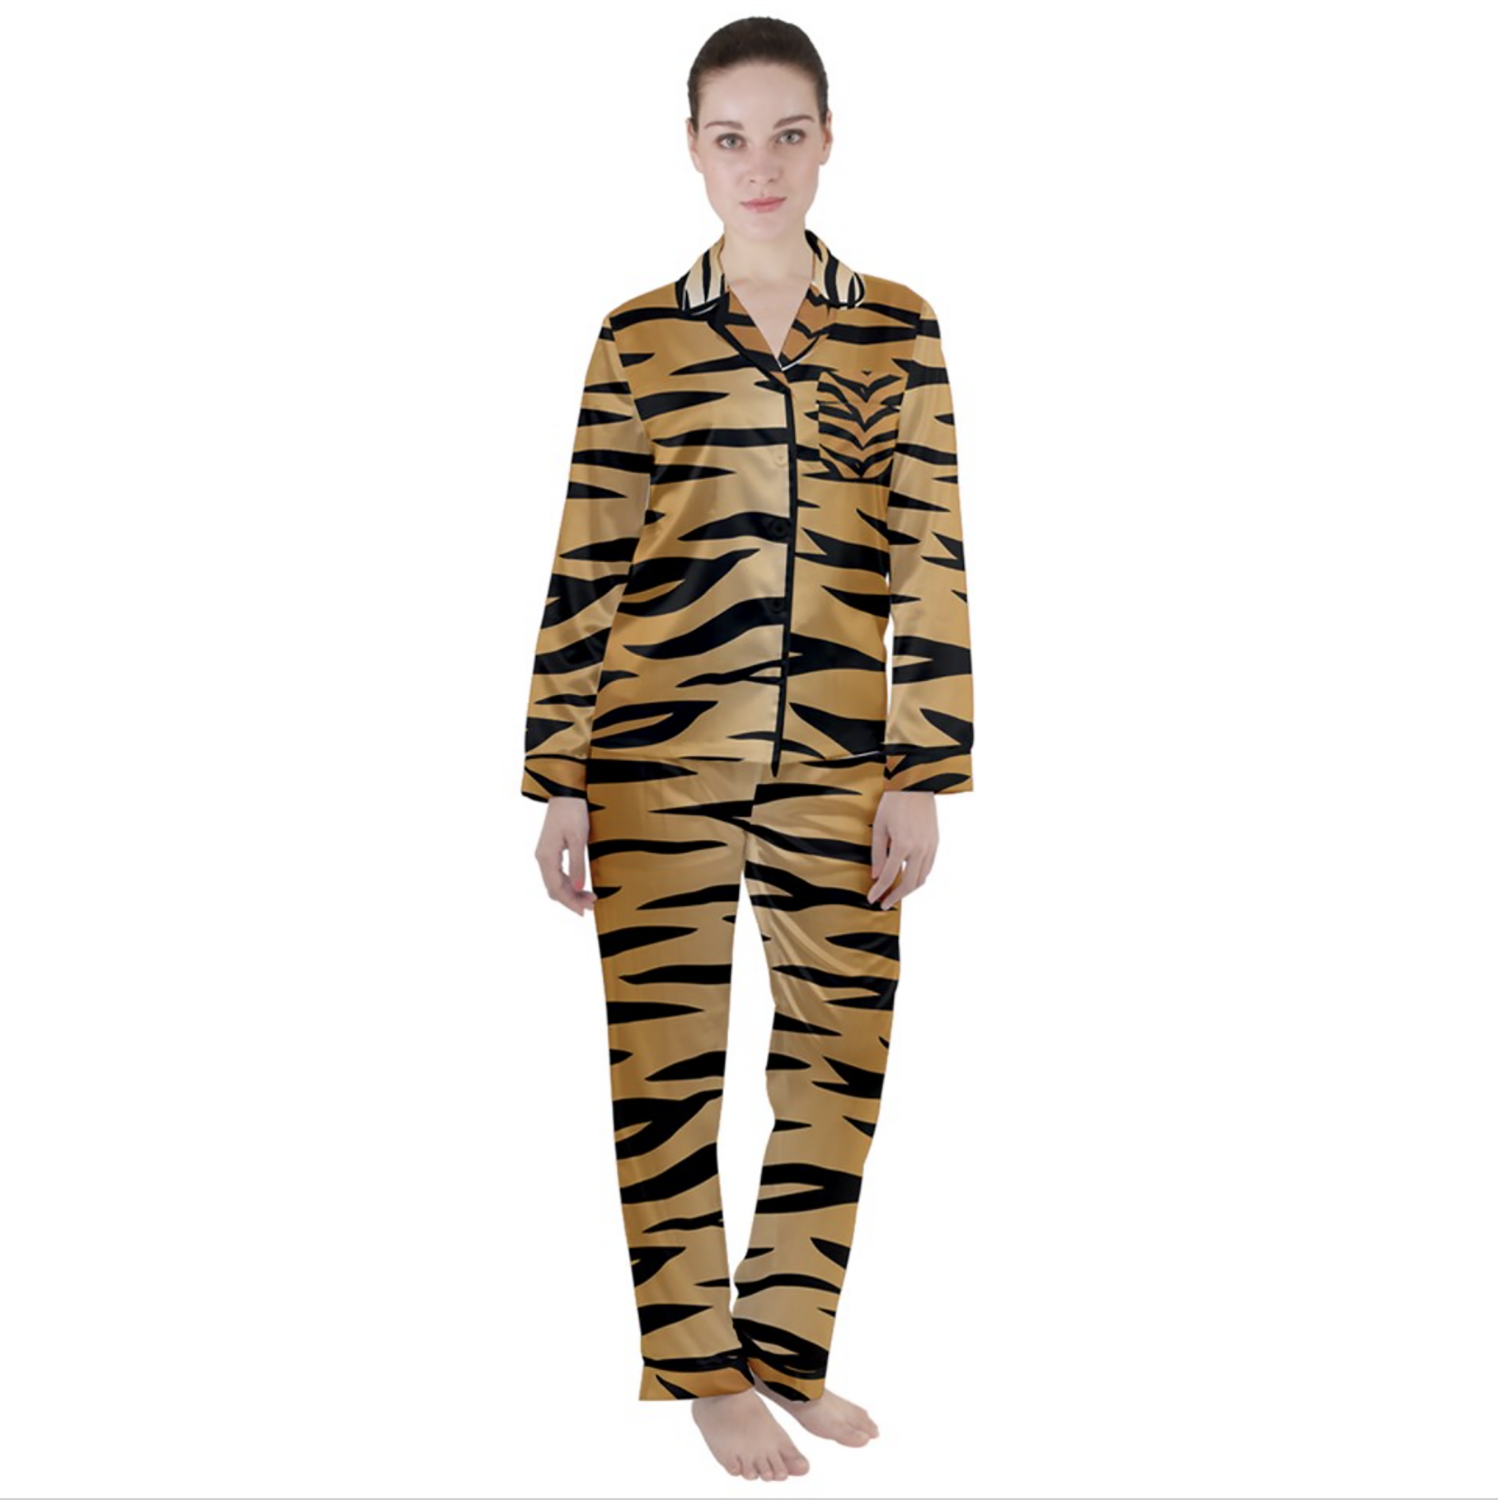 👸🏽🐅 Satin Pajamas Set For Women Classic Tiger print, Feline print, Animal's print, Satin Pajamas Set, Satin PJs, 7 sizes XS to 3XL, gift, gift for her